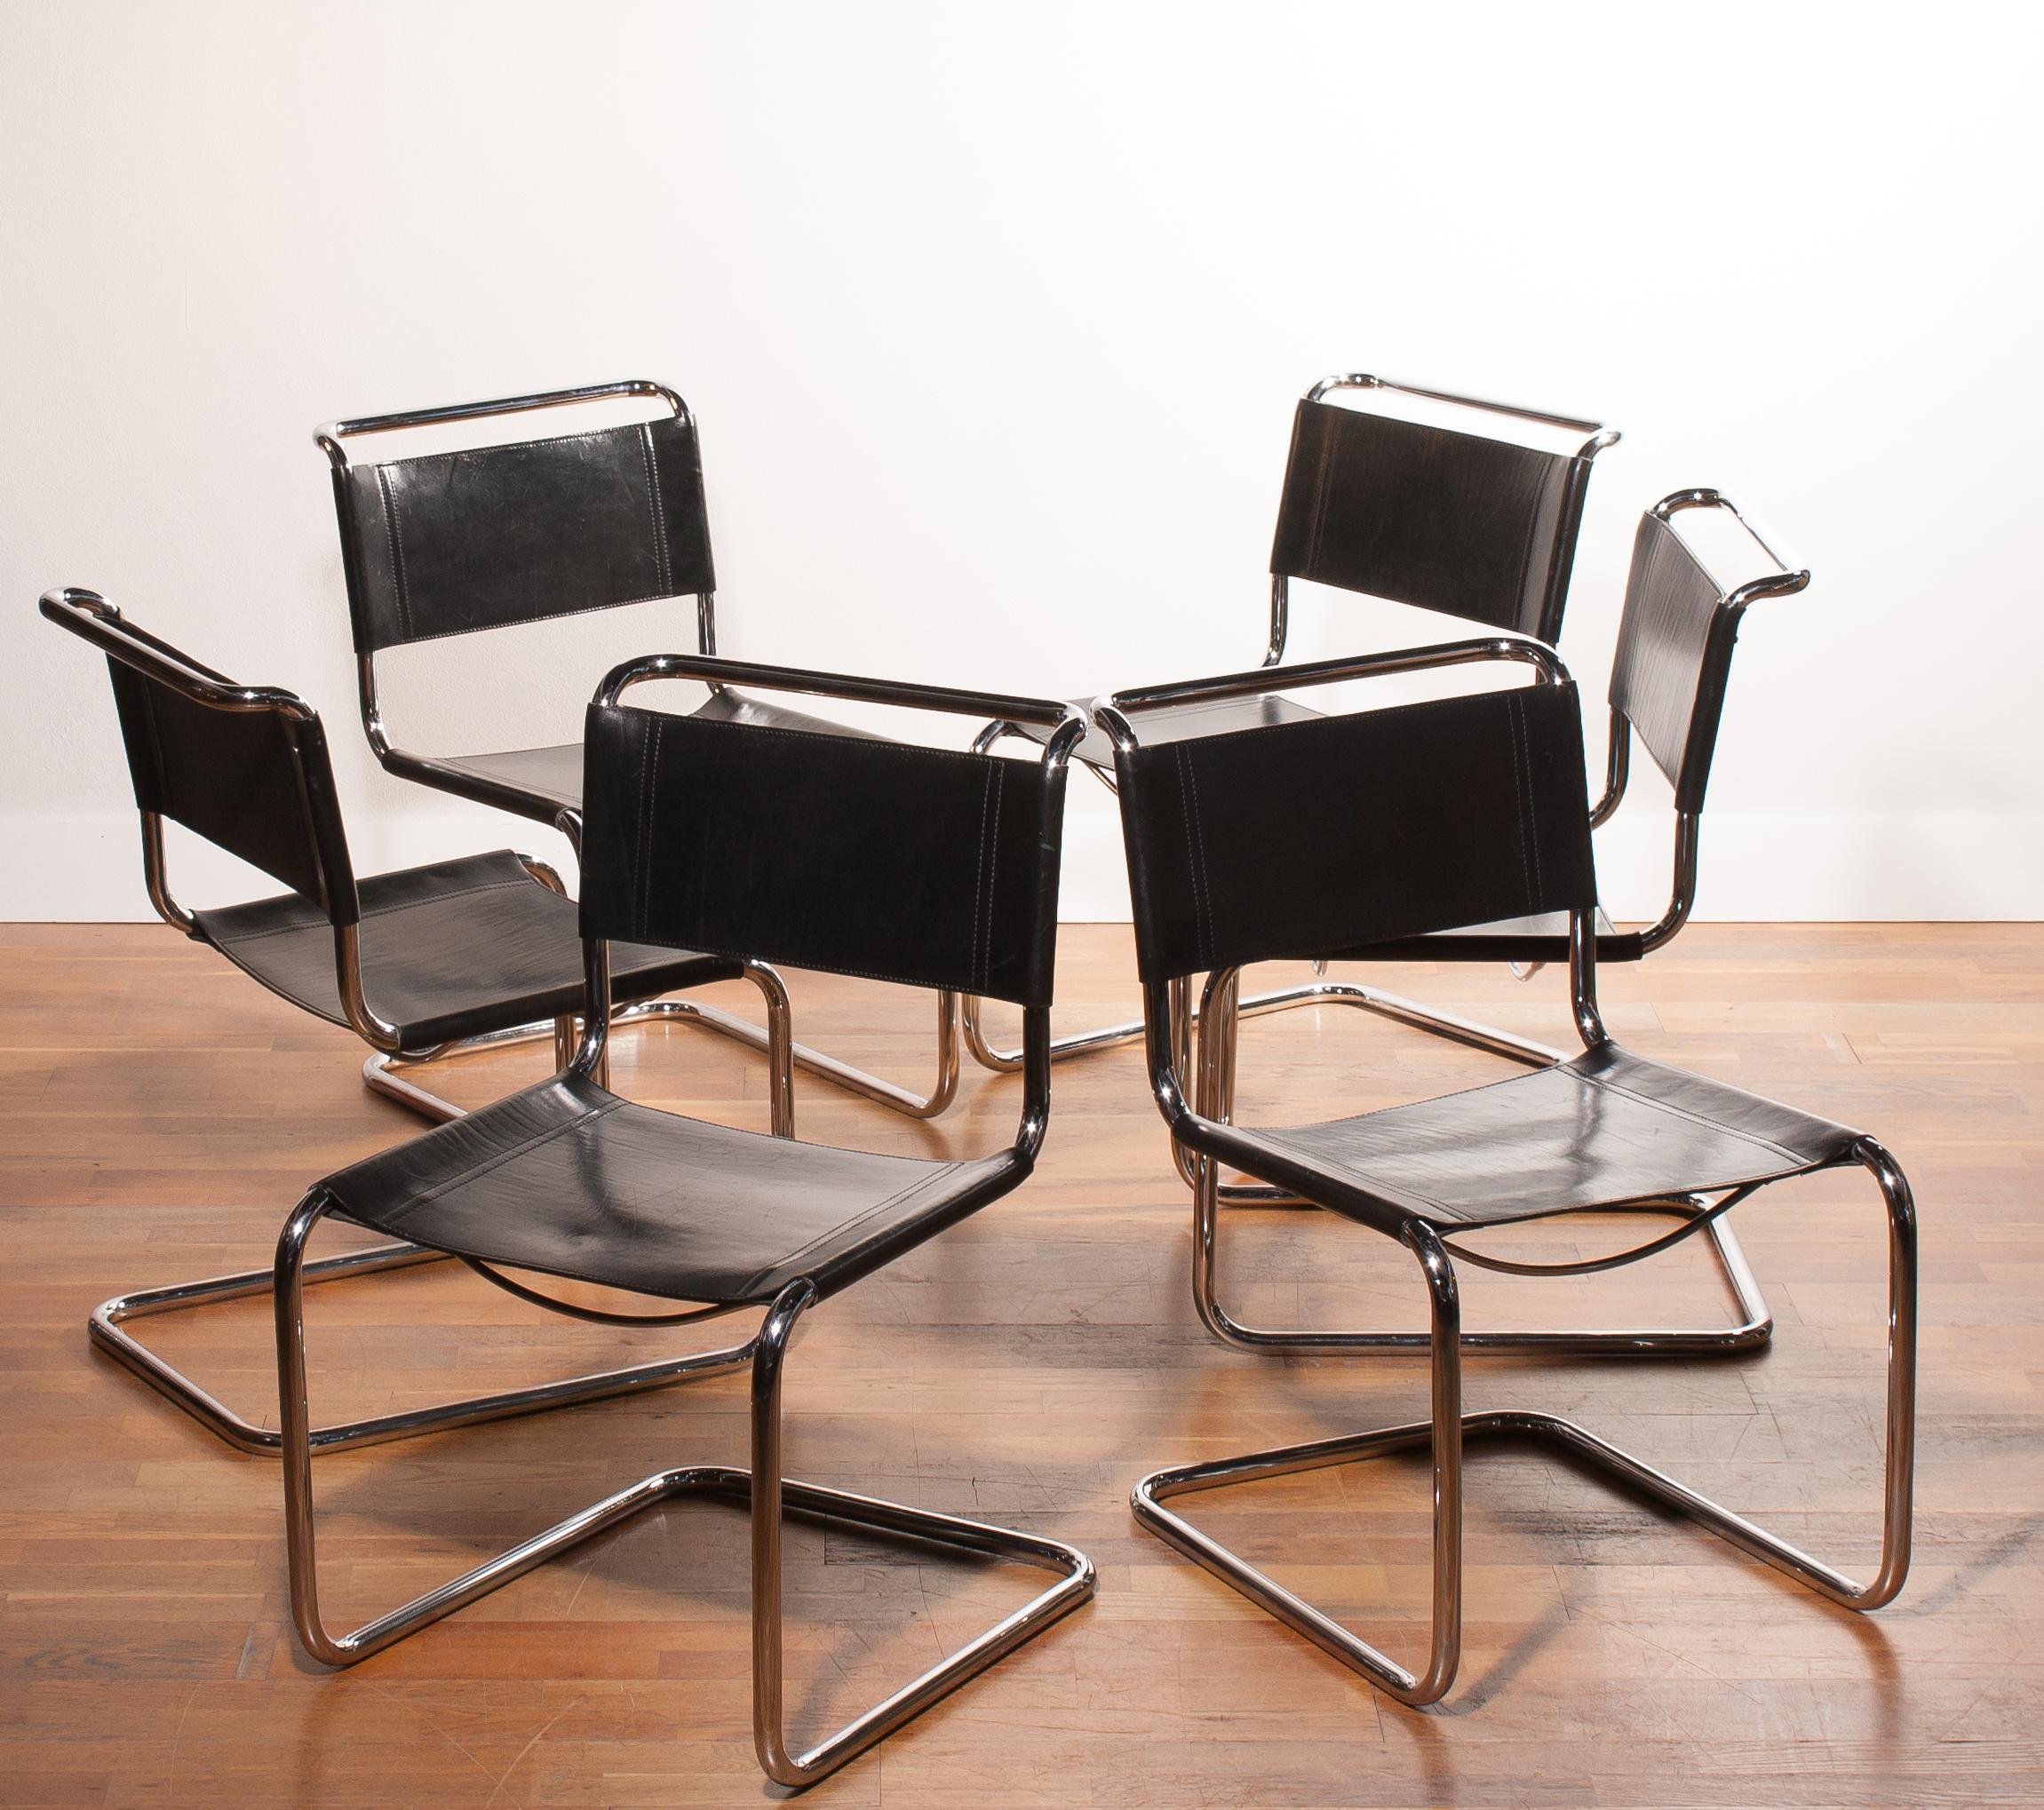 A beautiful set of six dining chairs designed by Mart Stam for Fasem.
These chairs have a cantilevered tubular metal frame with black saddle leather seating and backrest.
They are in wonderful condition.
Period 1970s.
Dimensions: H 84 cm, W 52